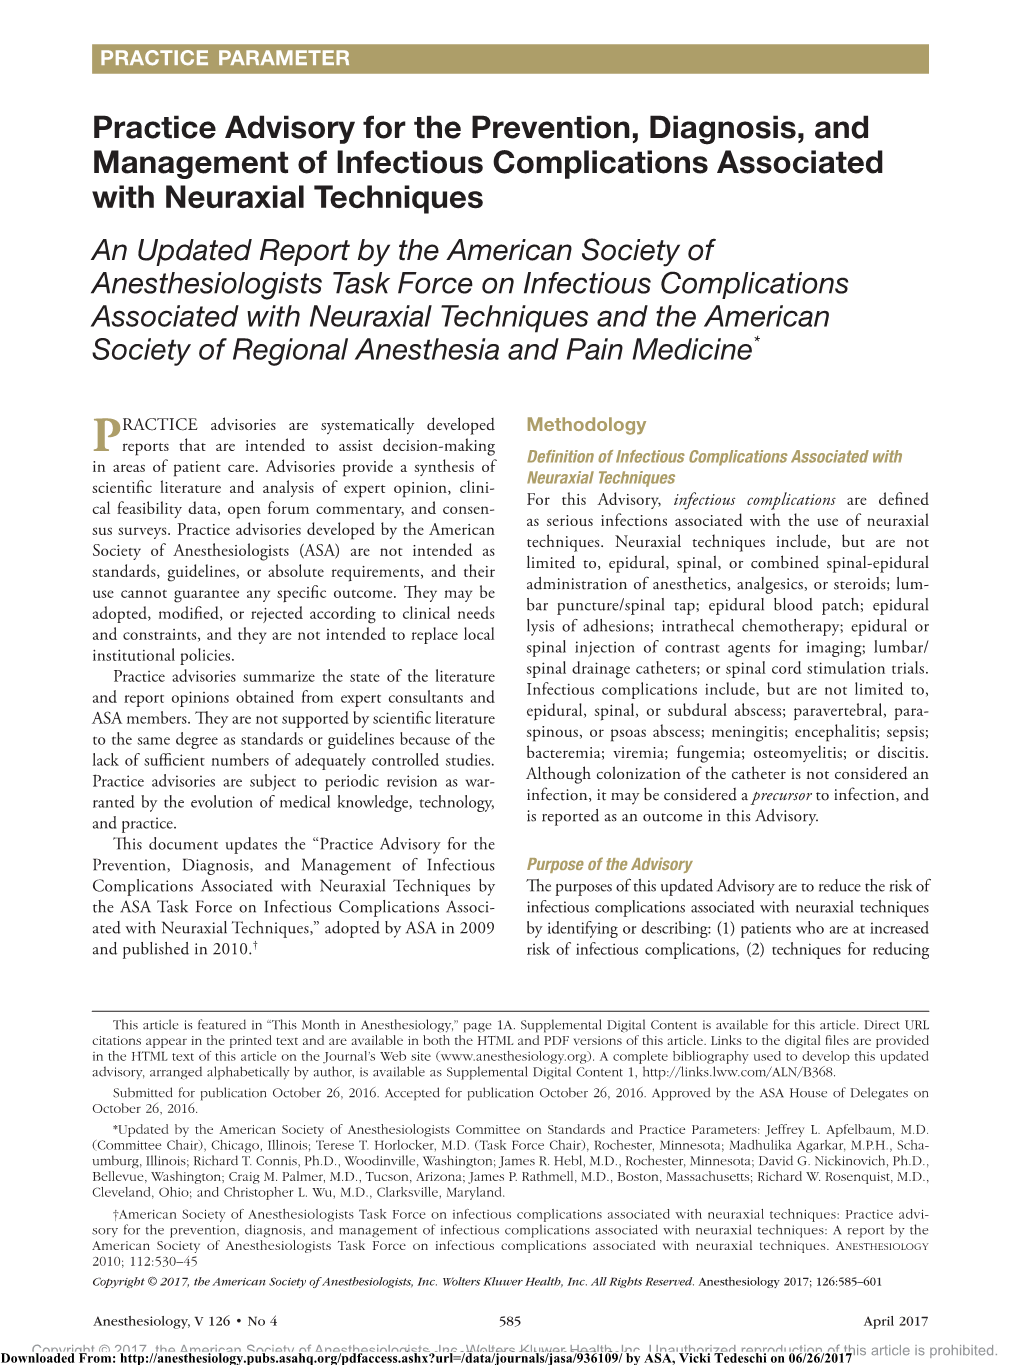 Practice Advisory for the Prevention, Diagnosis, and Management of Infectious Complications Associated with Neuraxial Techniques